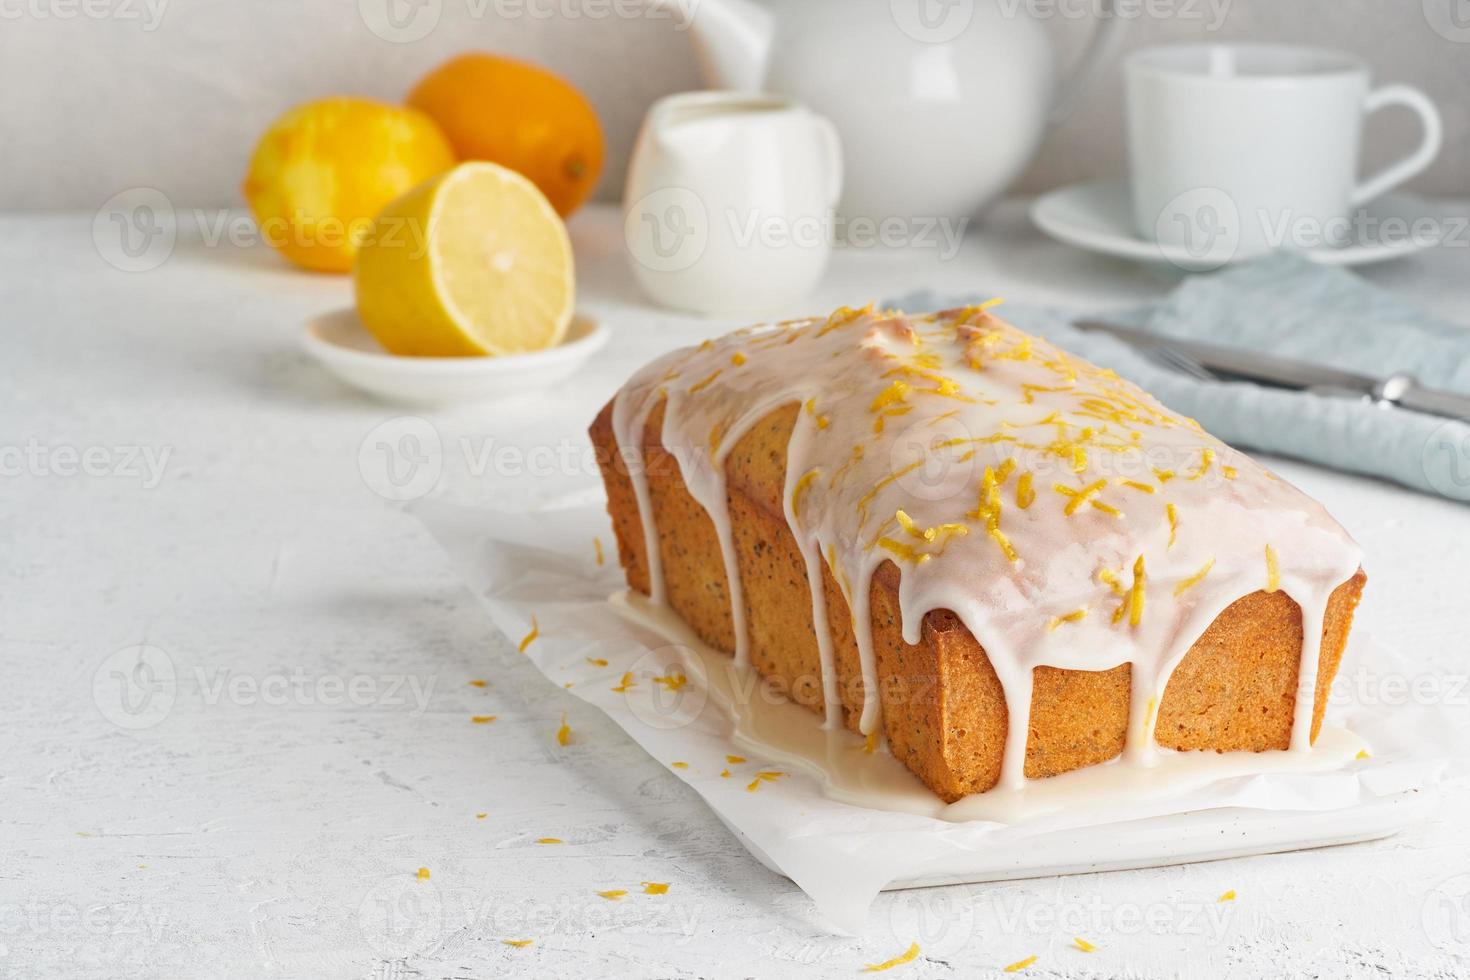 Lemon bread coated with sugar sweet icing. Whole loaf. White background, side view, copy space photo